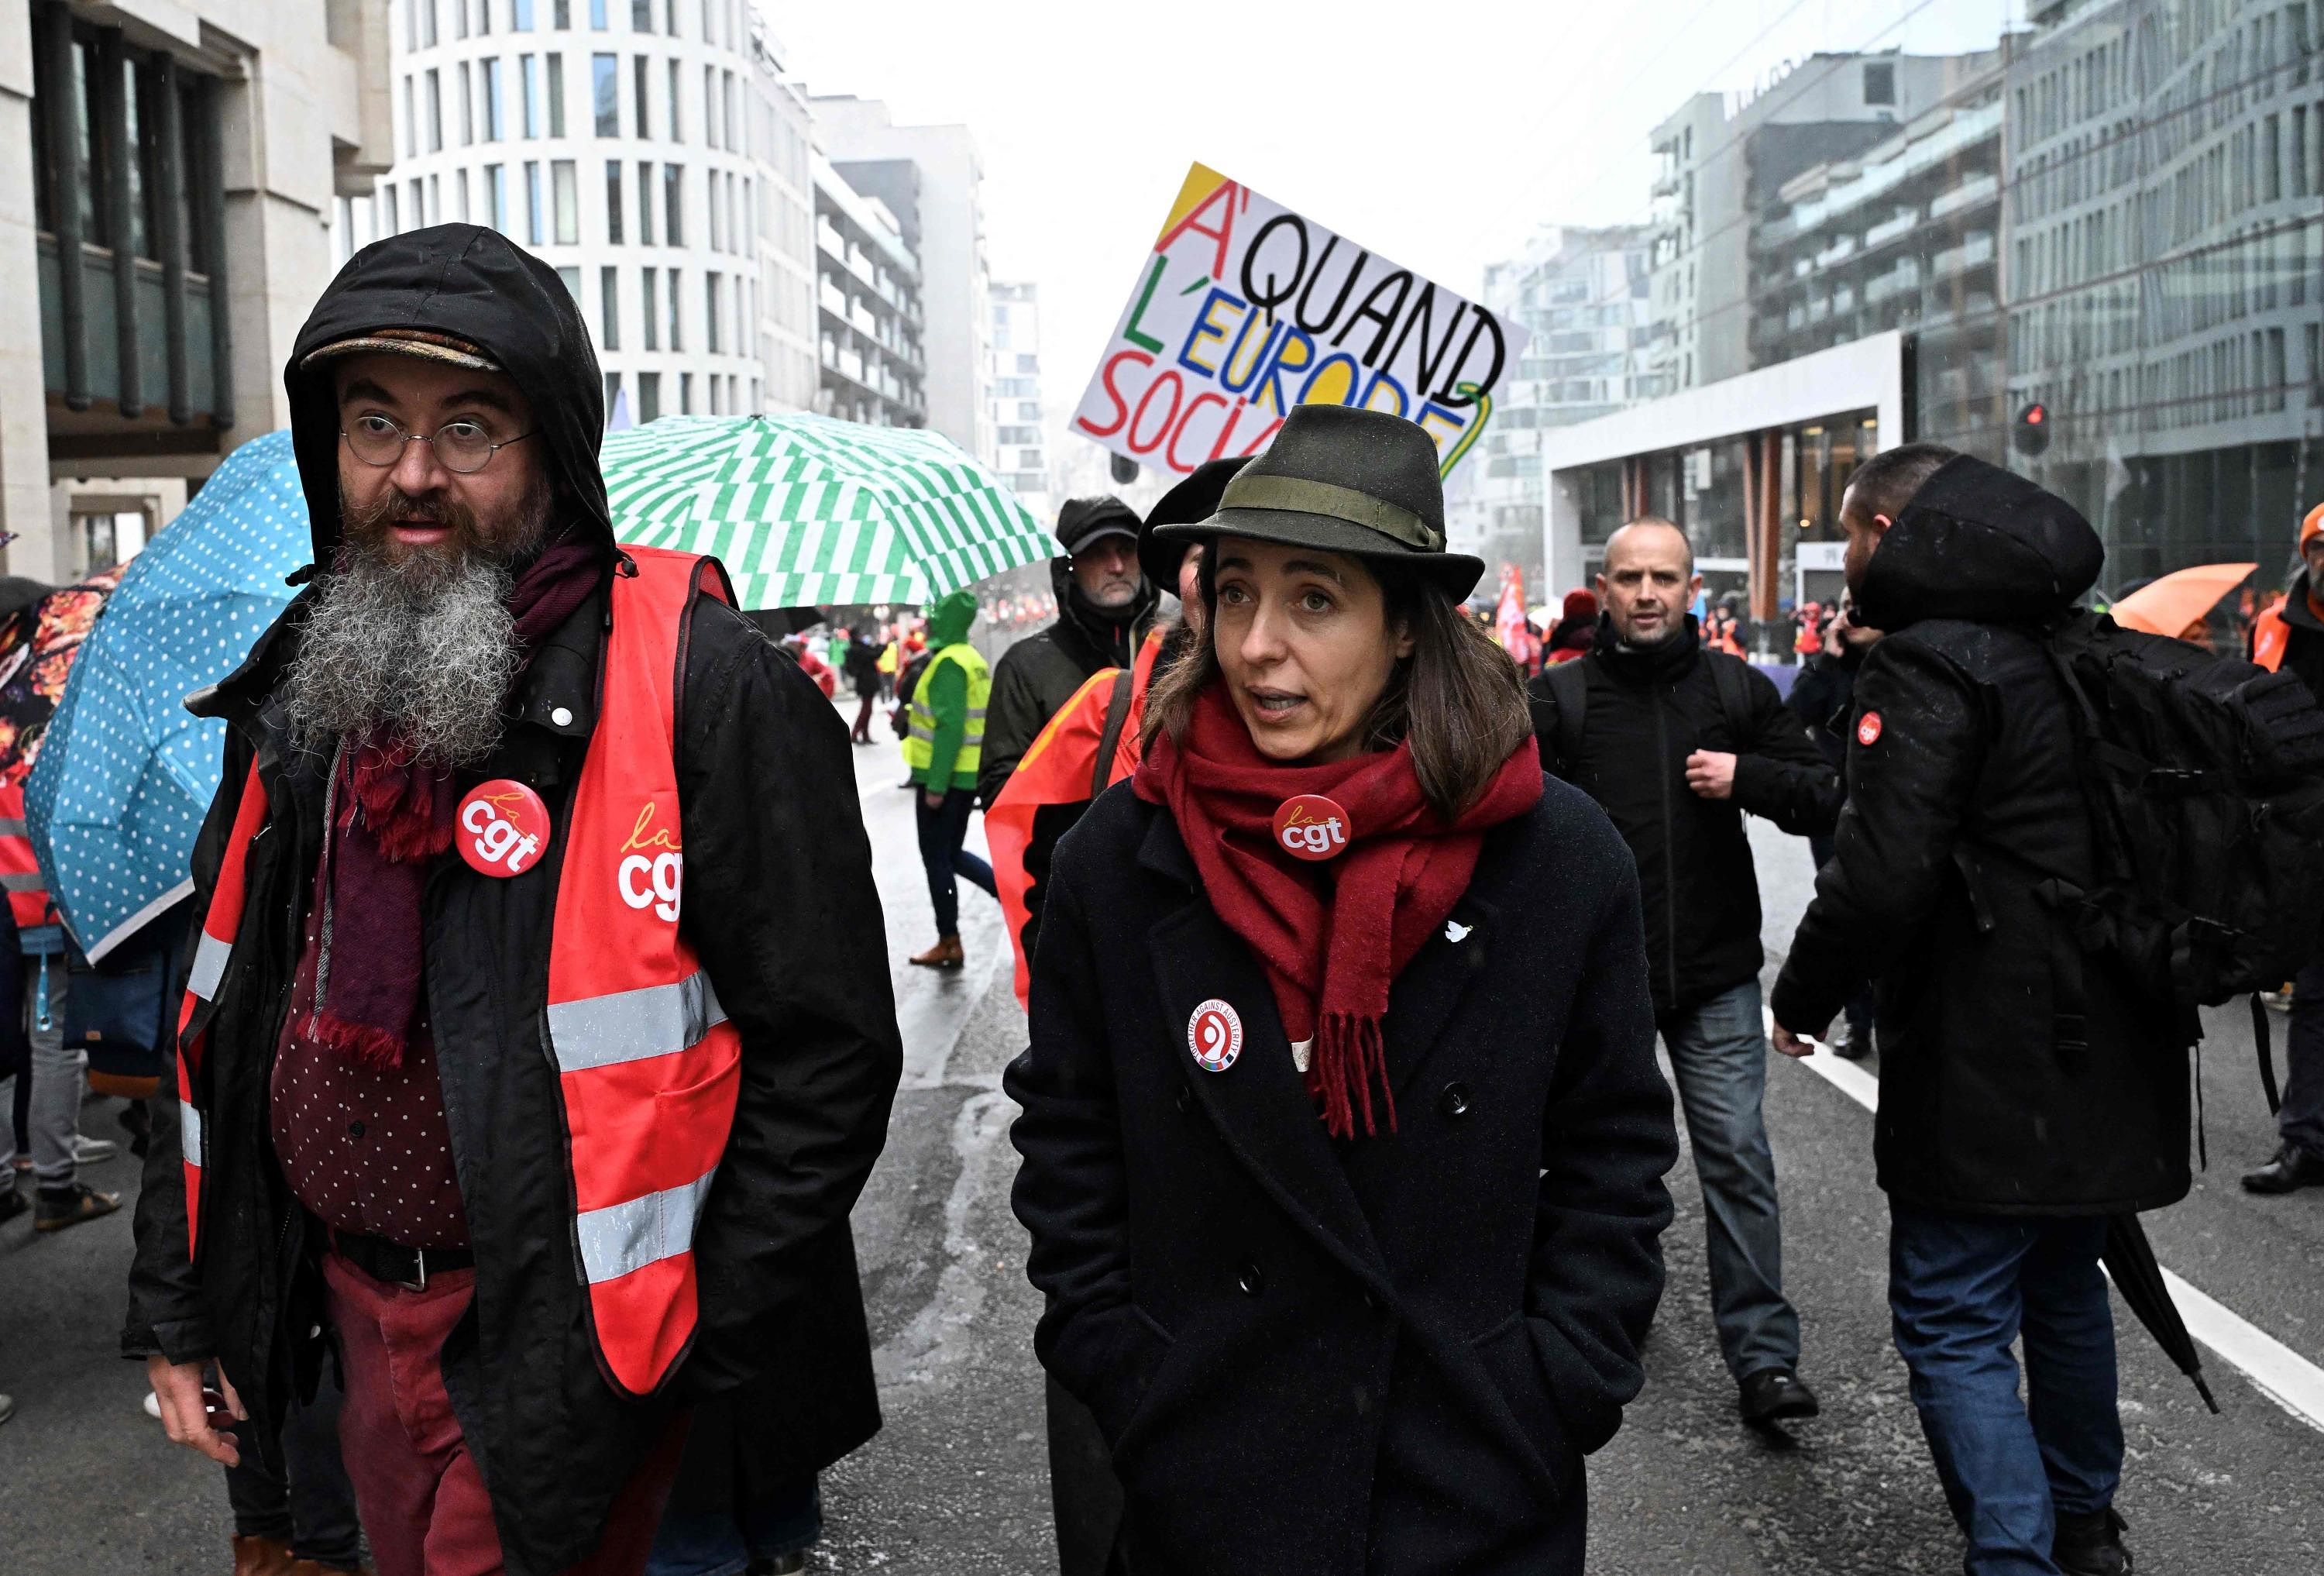 Center Pompidou: Sophie Binet provides her “full support” to the strikers